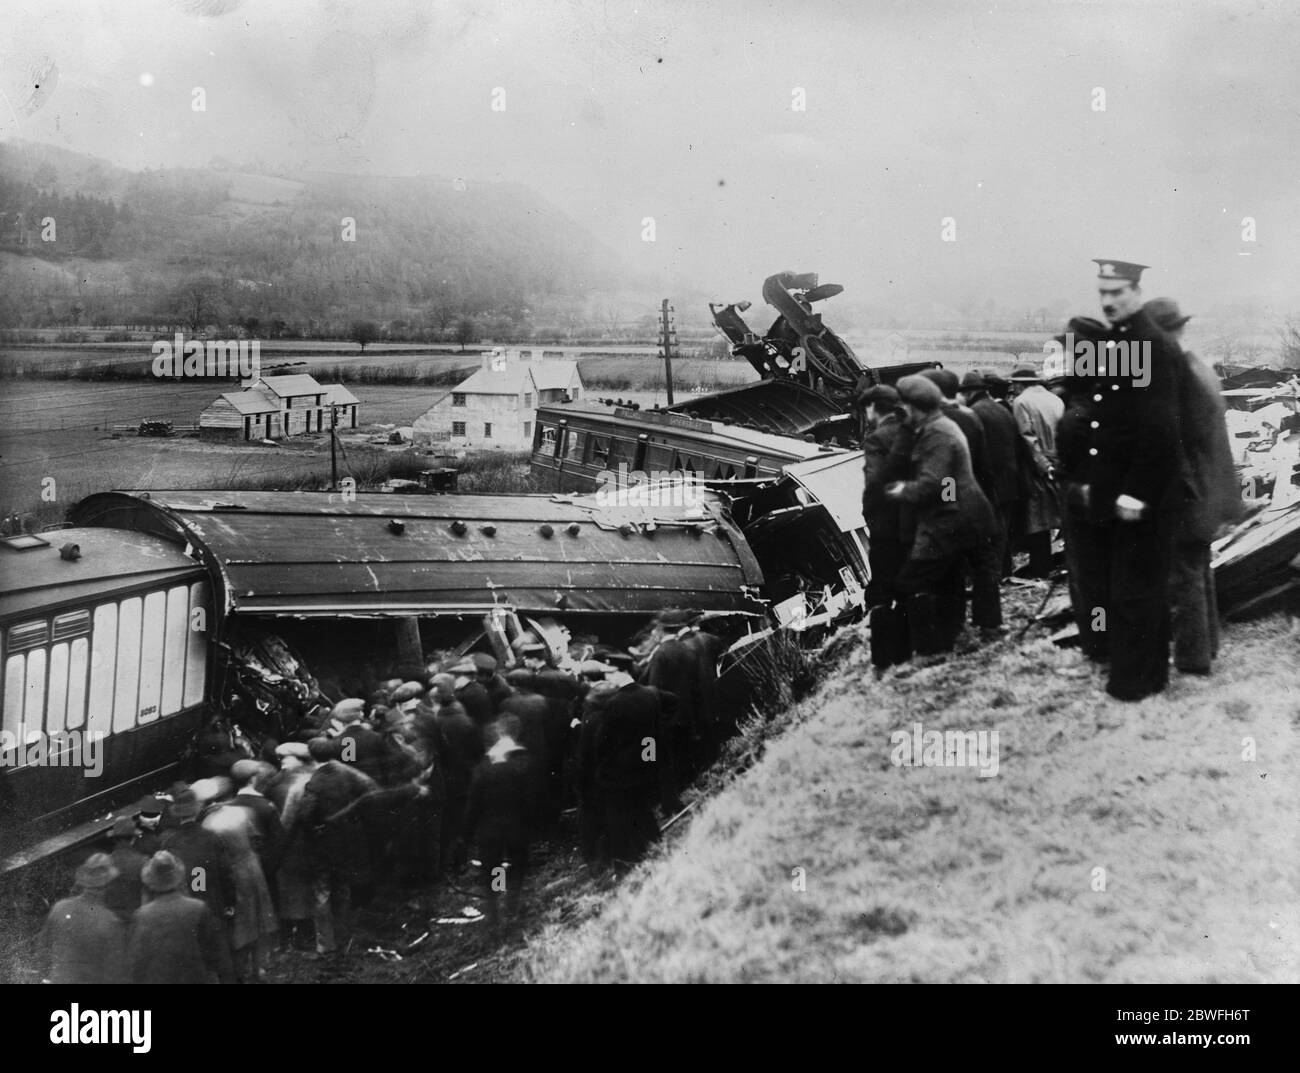 The Welsh express disaster The tangled mass of tragic wreckage which was presented after the wreck on the wreckage was over 27 January 1921 Abermule train collision Stock Photo